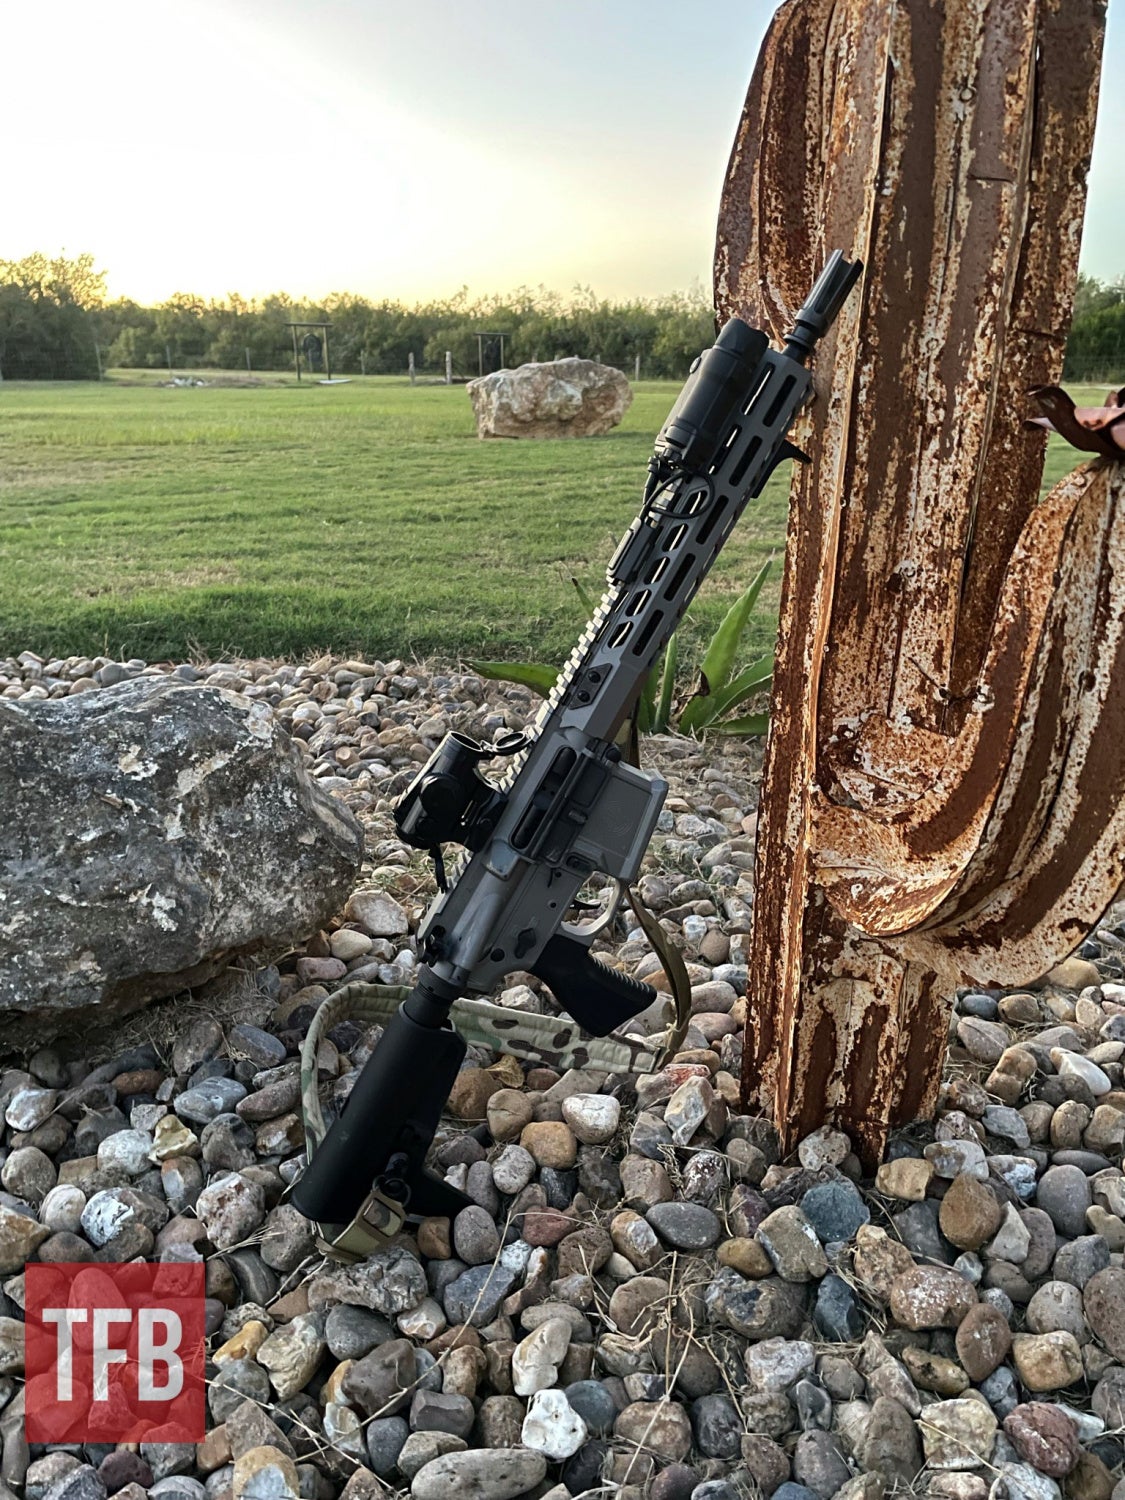 SIG's ROMEO4T red dot proved to be perfectly complimentary to the gun, and I think one of their new SLX suppressors would round out the package nicely.